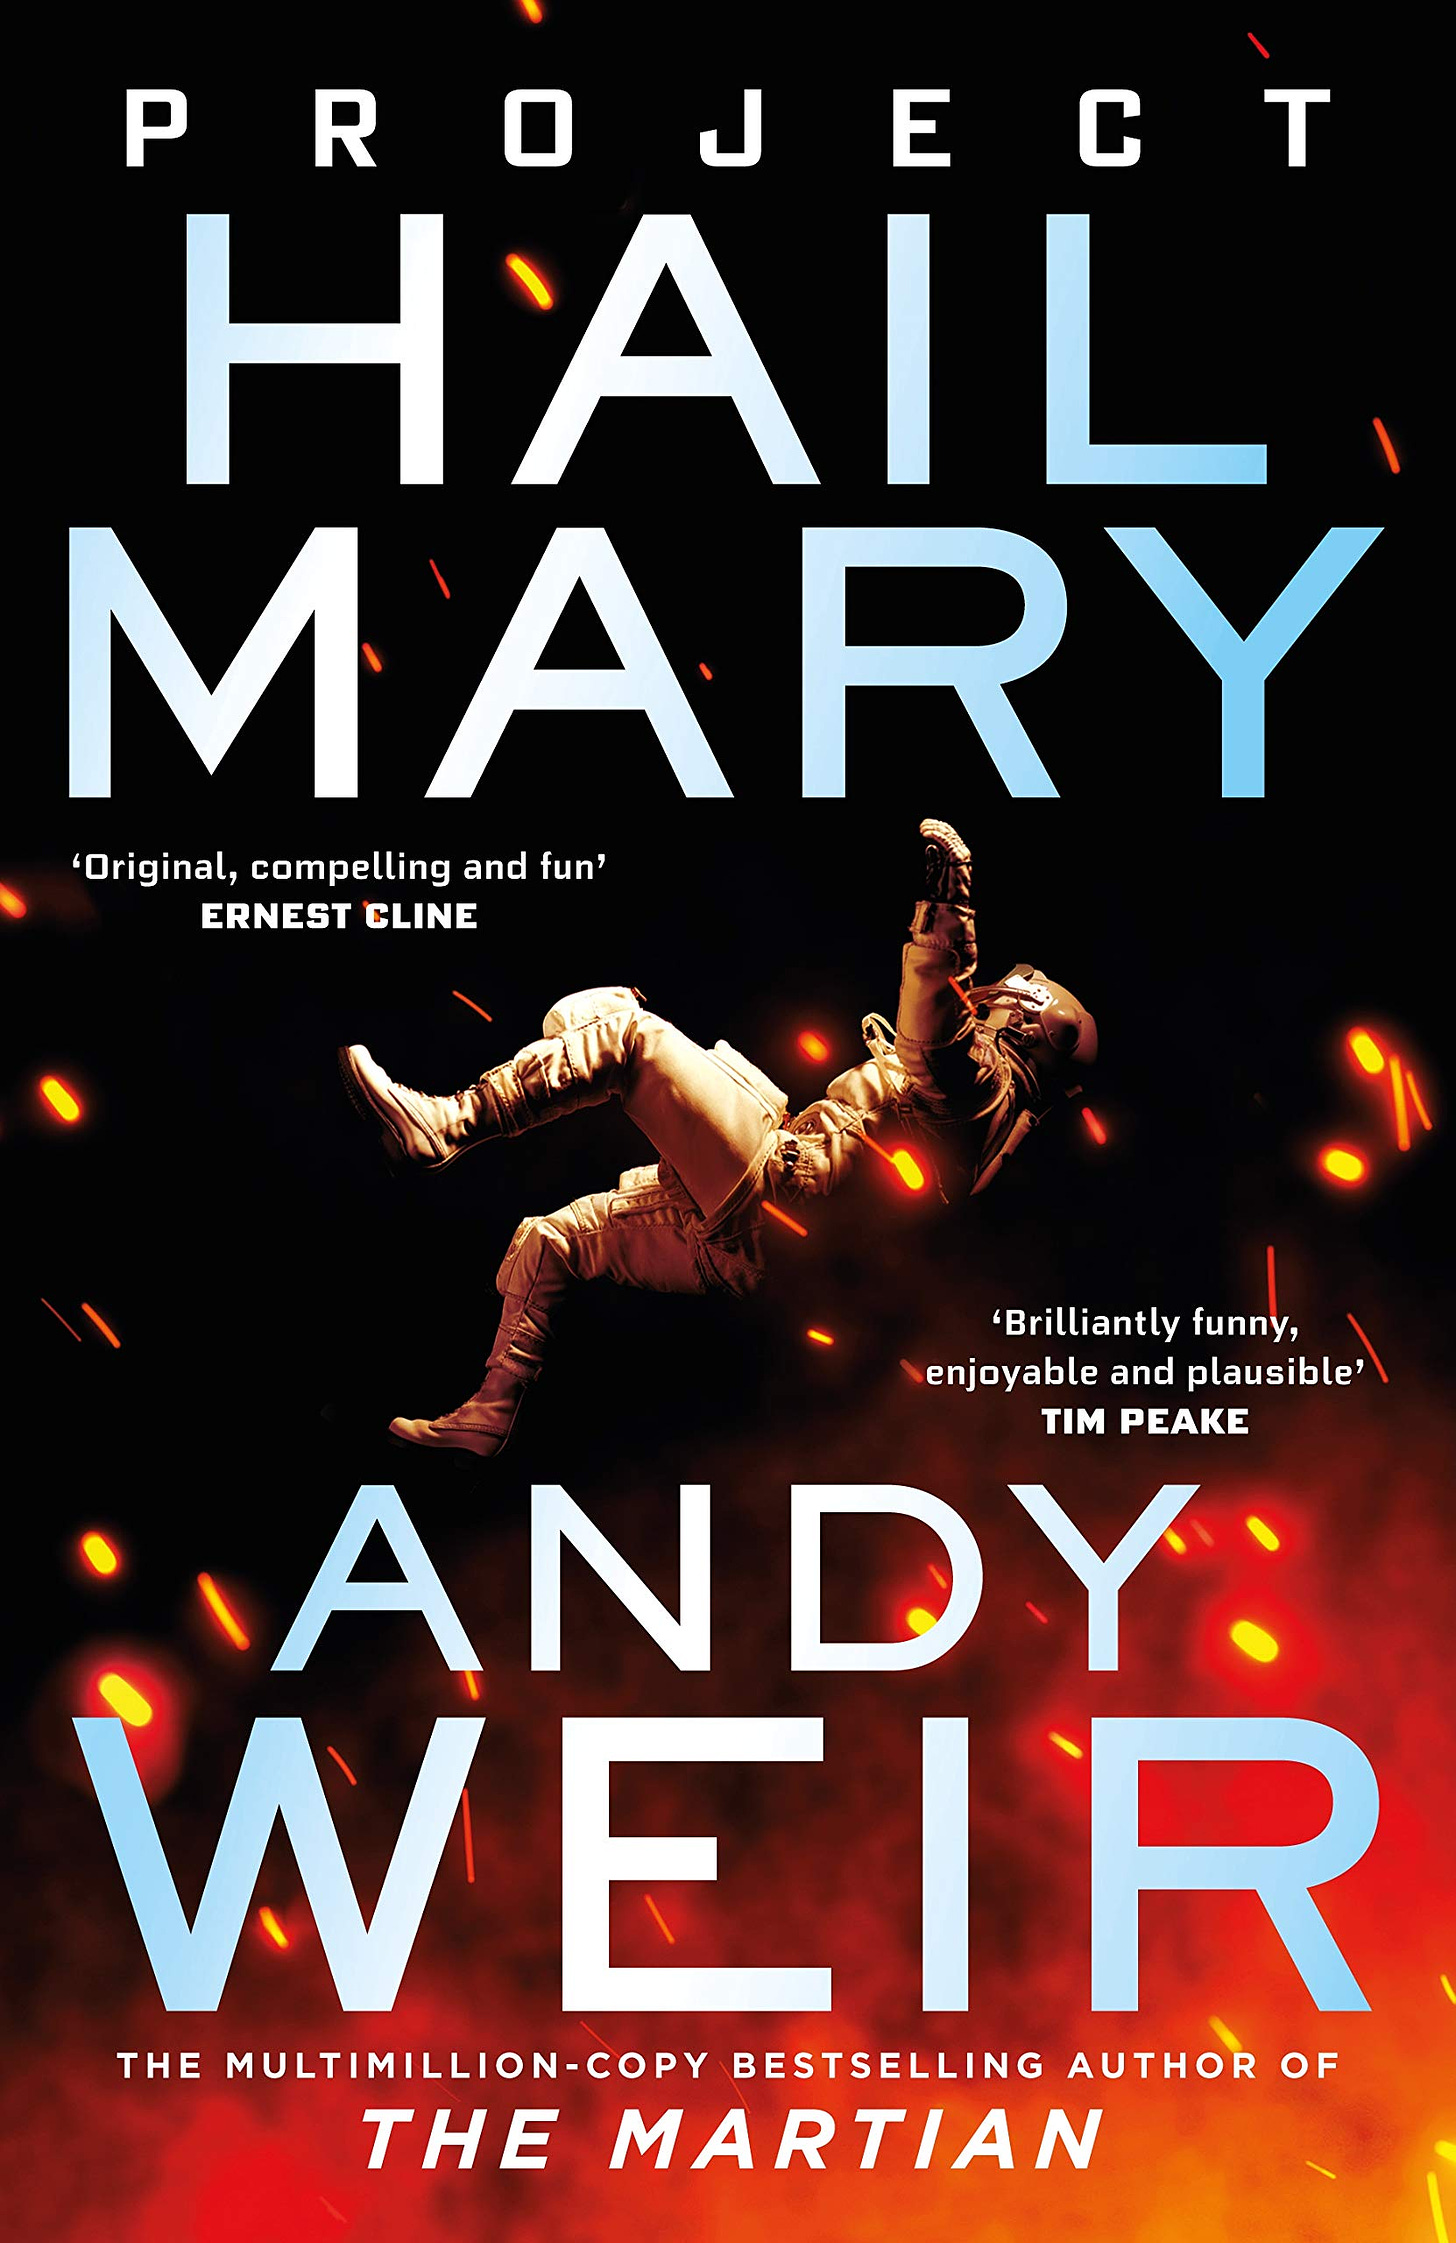 Project Hail Mary: From the bestselling author of The Martian : Weir, Andy:  Amazon.es: Libros